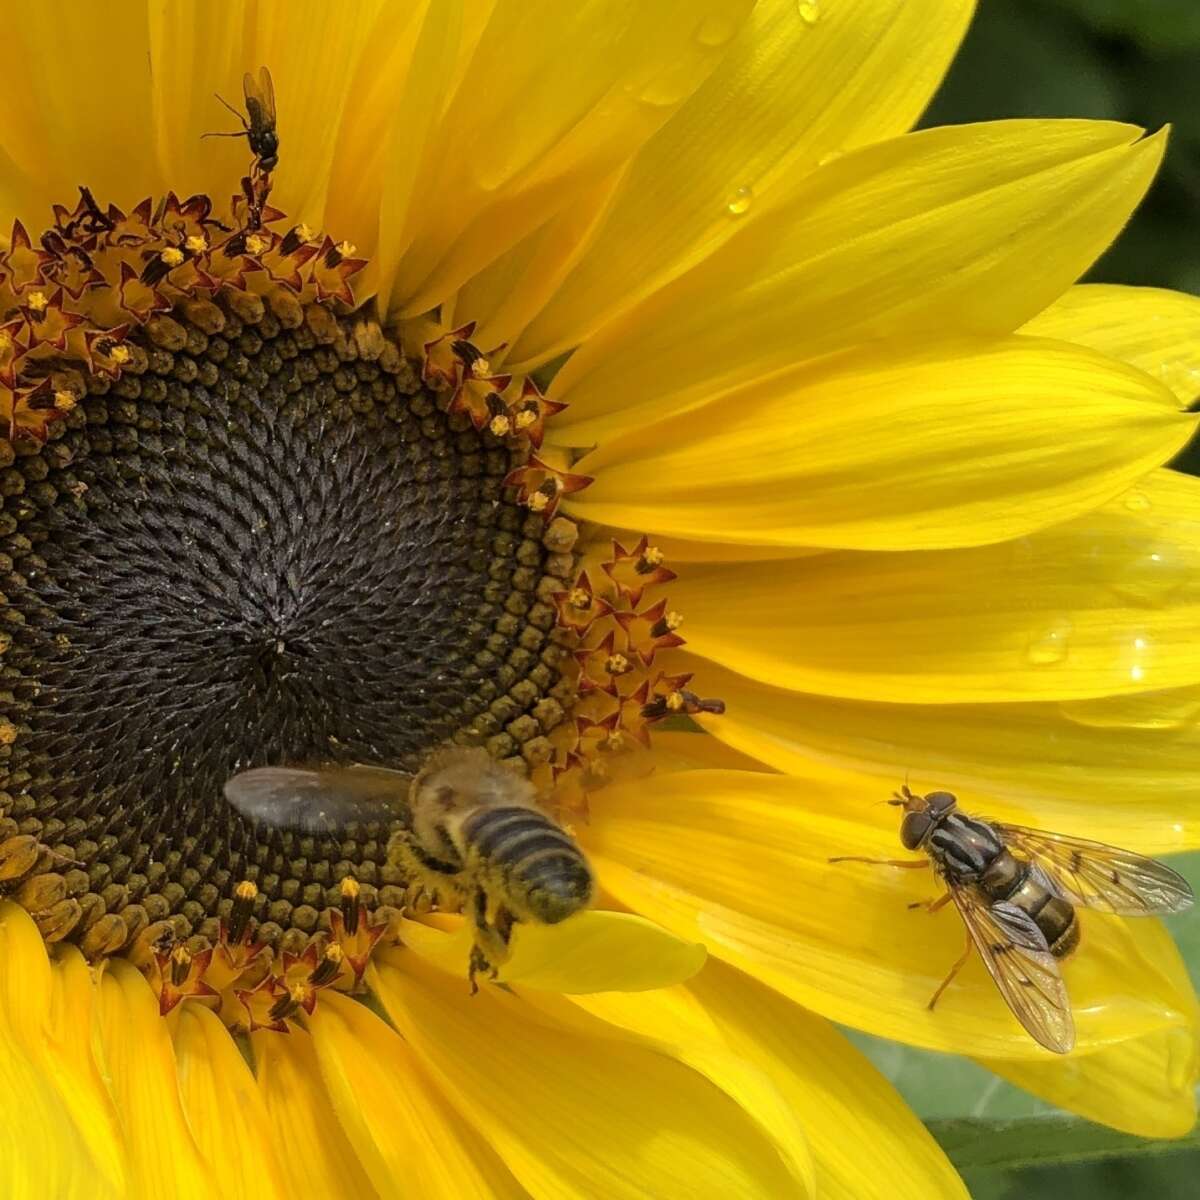 Insects on sunflower